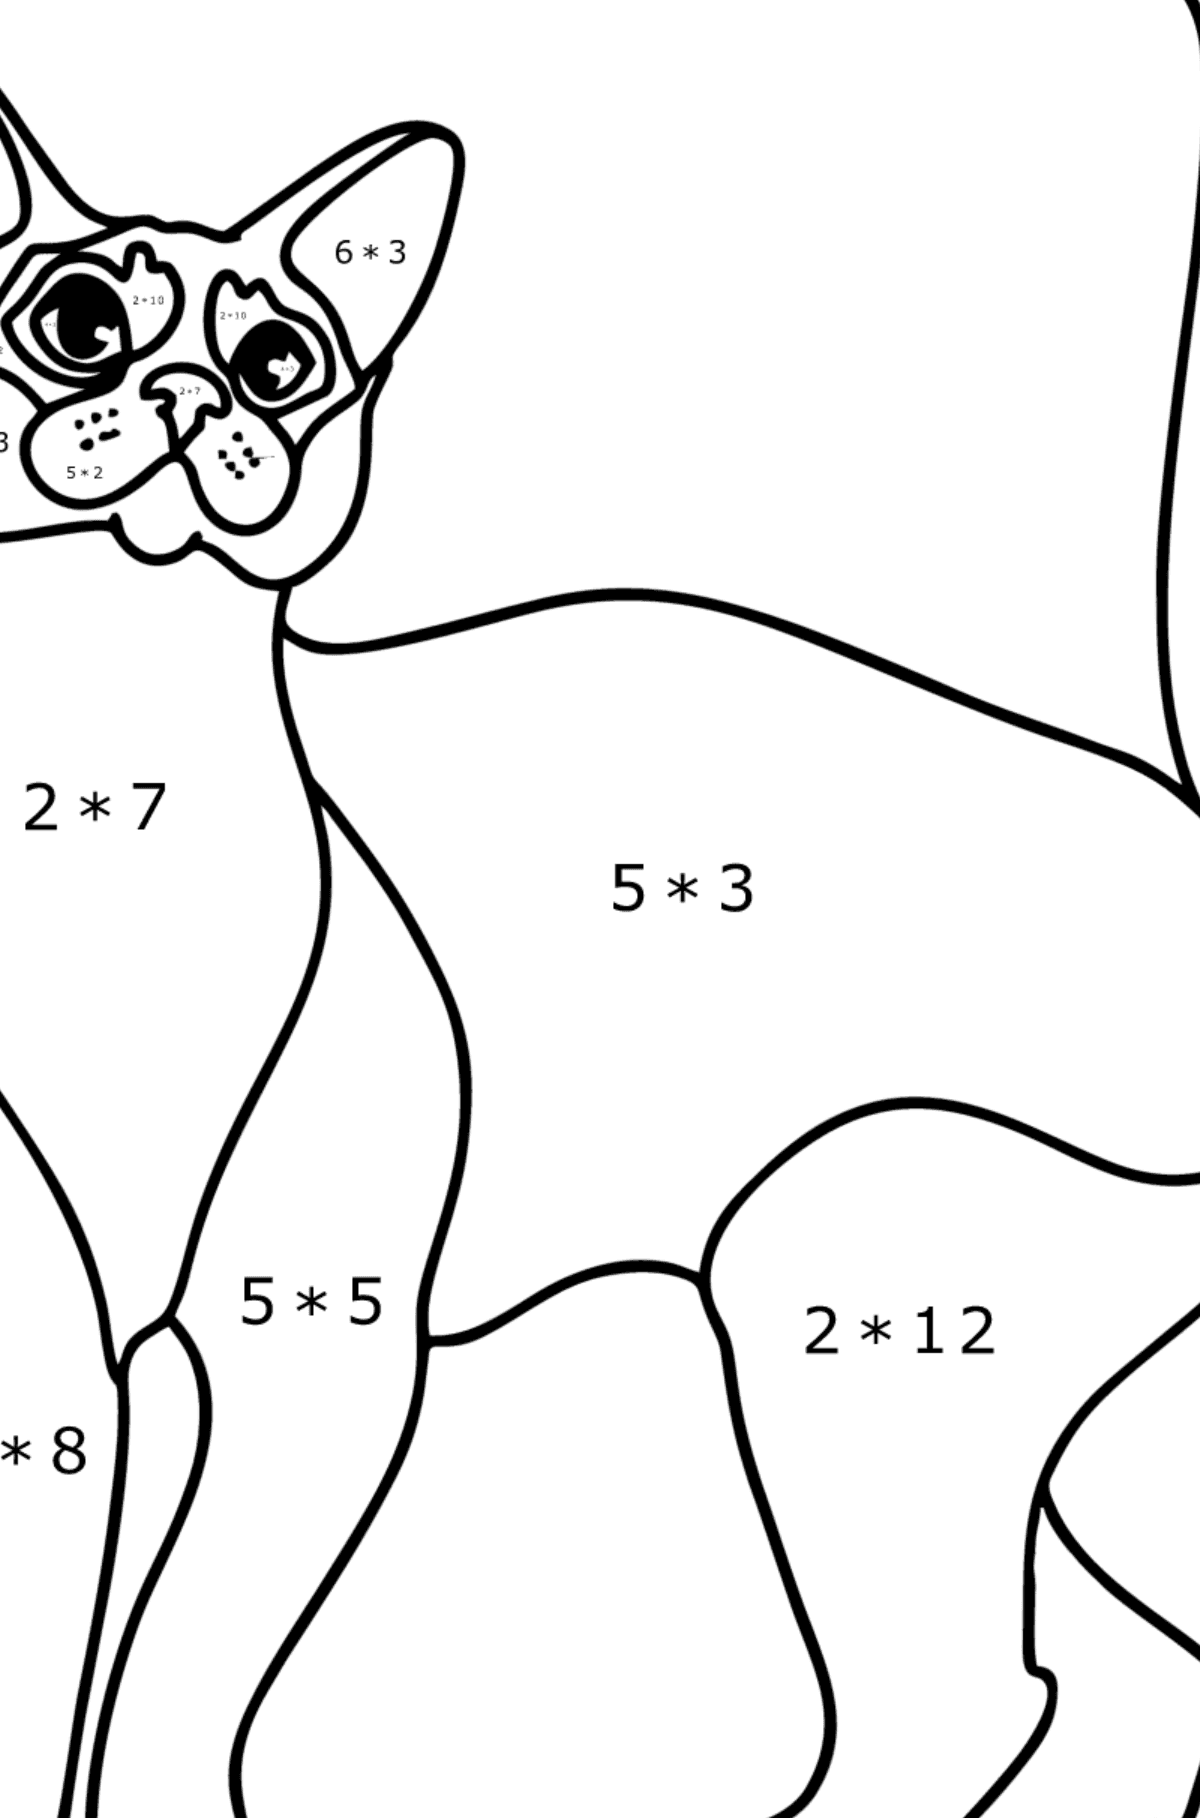 Abyssinian Cat coloring page - Math Coloring - Multiplication for Kids